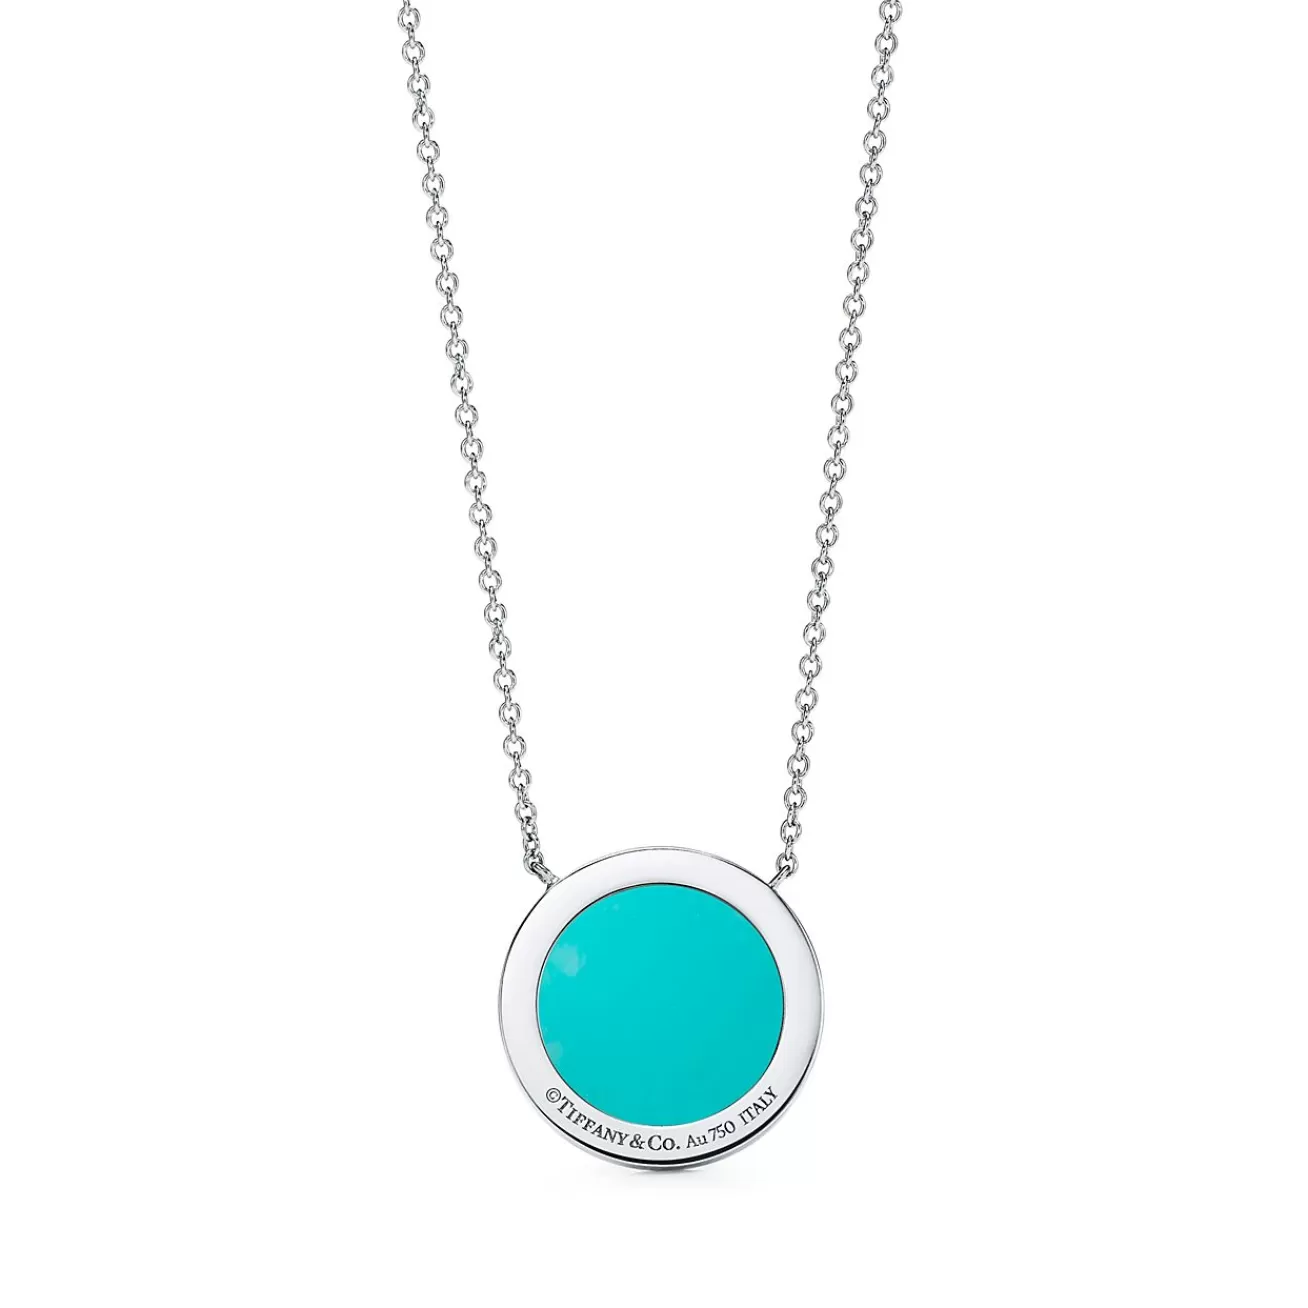 Tiffany & Co. Tiffany T diamond and turquoise circle pendant in 18k white gold. | ^ Necklaces & Pendants | Diamond Jewelry